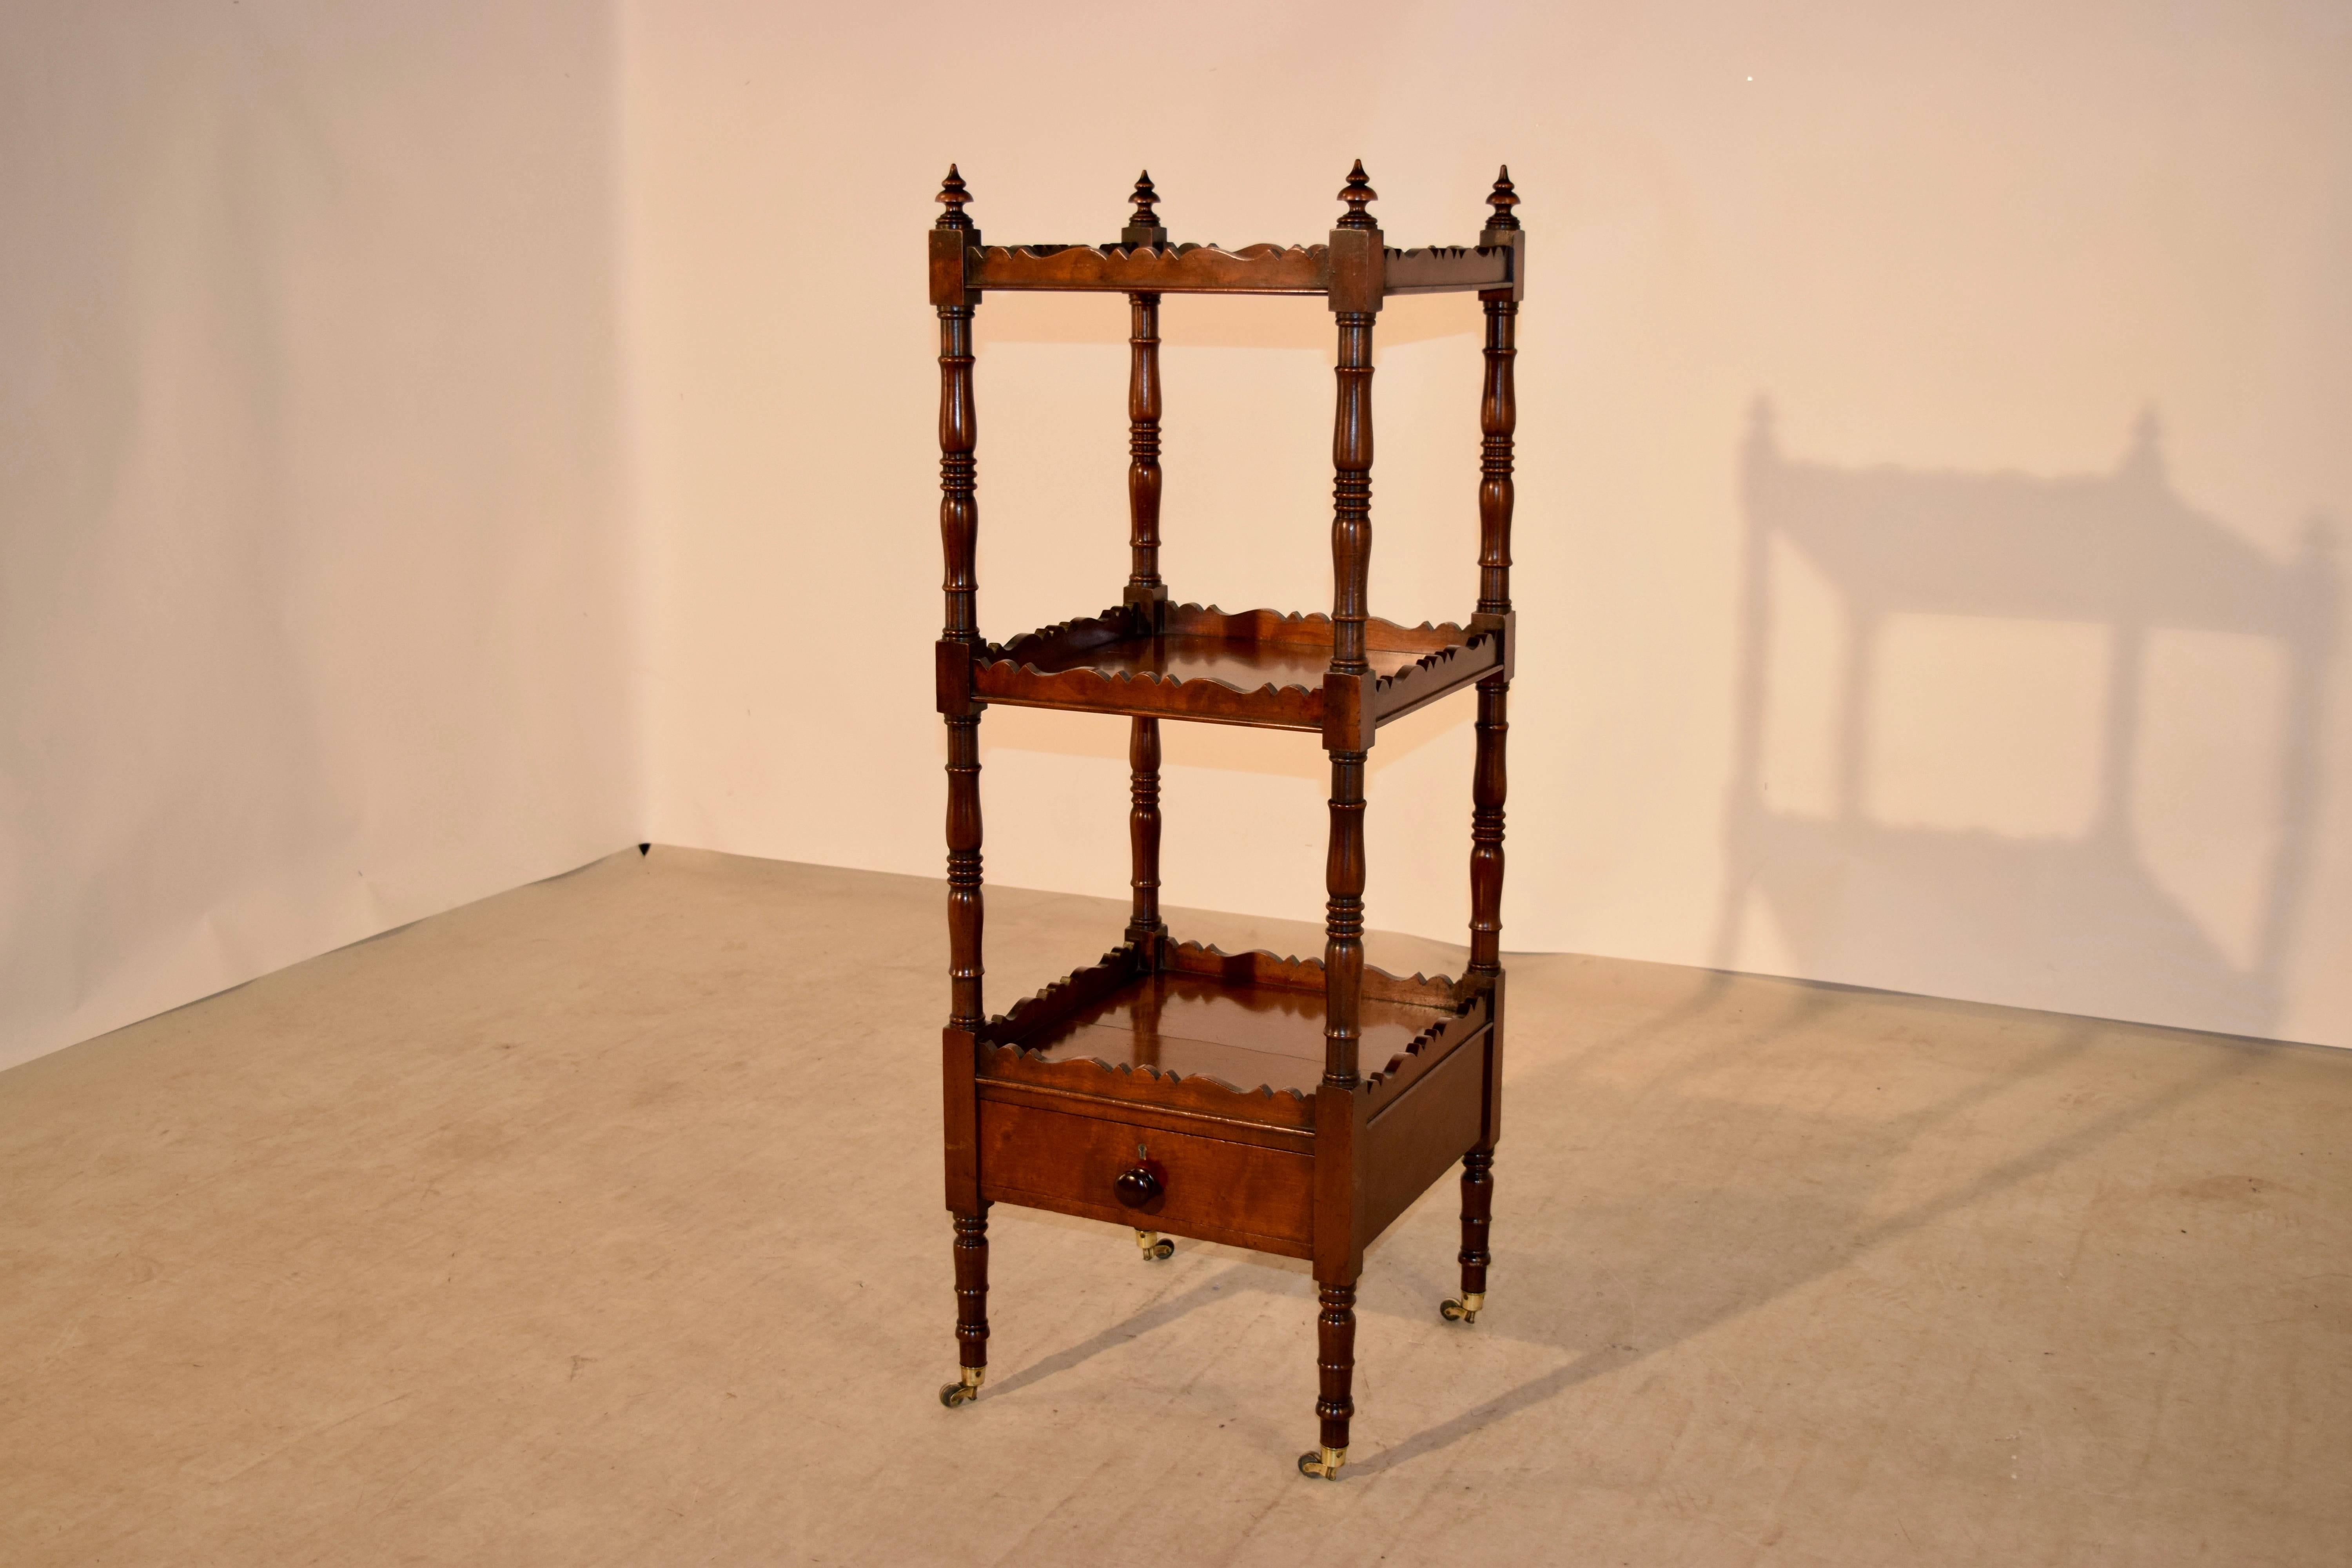 19th century English etagere made from Mahogany. It has three shelves, separated with hand turned shelf supports and has scalloped galleries and finials on top. There is a single drawer at the base and it is raised on hand-turned legs.